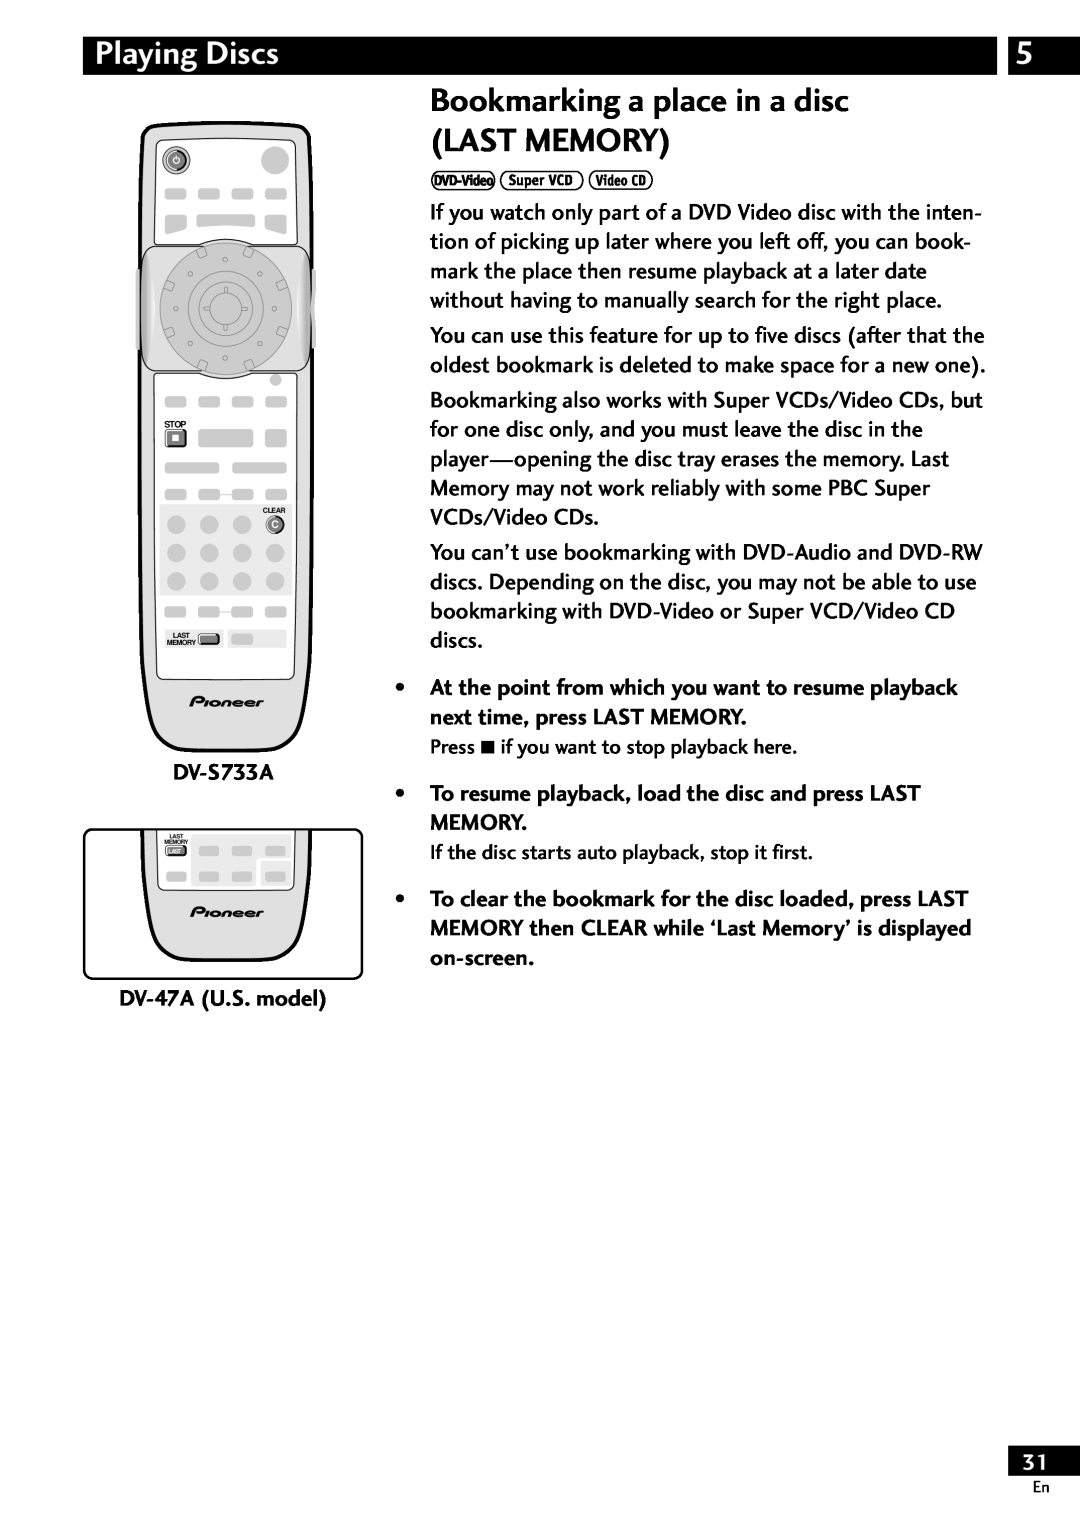 Pioneer DV-S733A operating instructions Bookmarking a place in a disc LAST MEMORY, DV-47A U.S. model, Playing Discs 